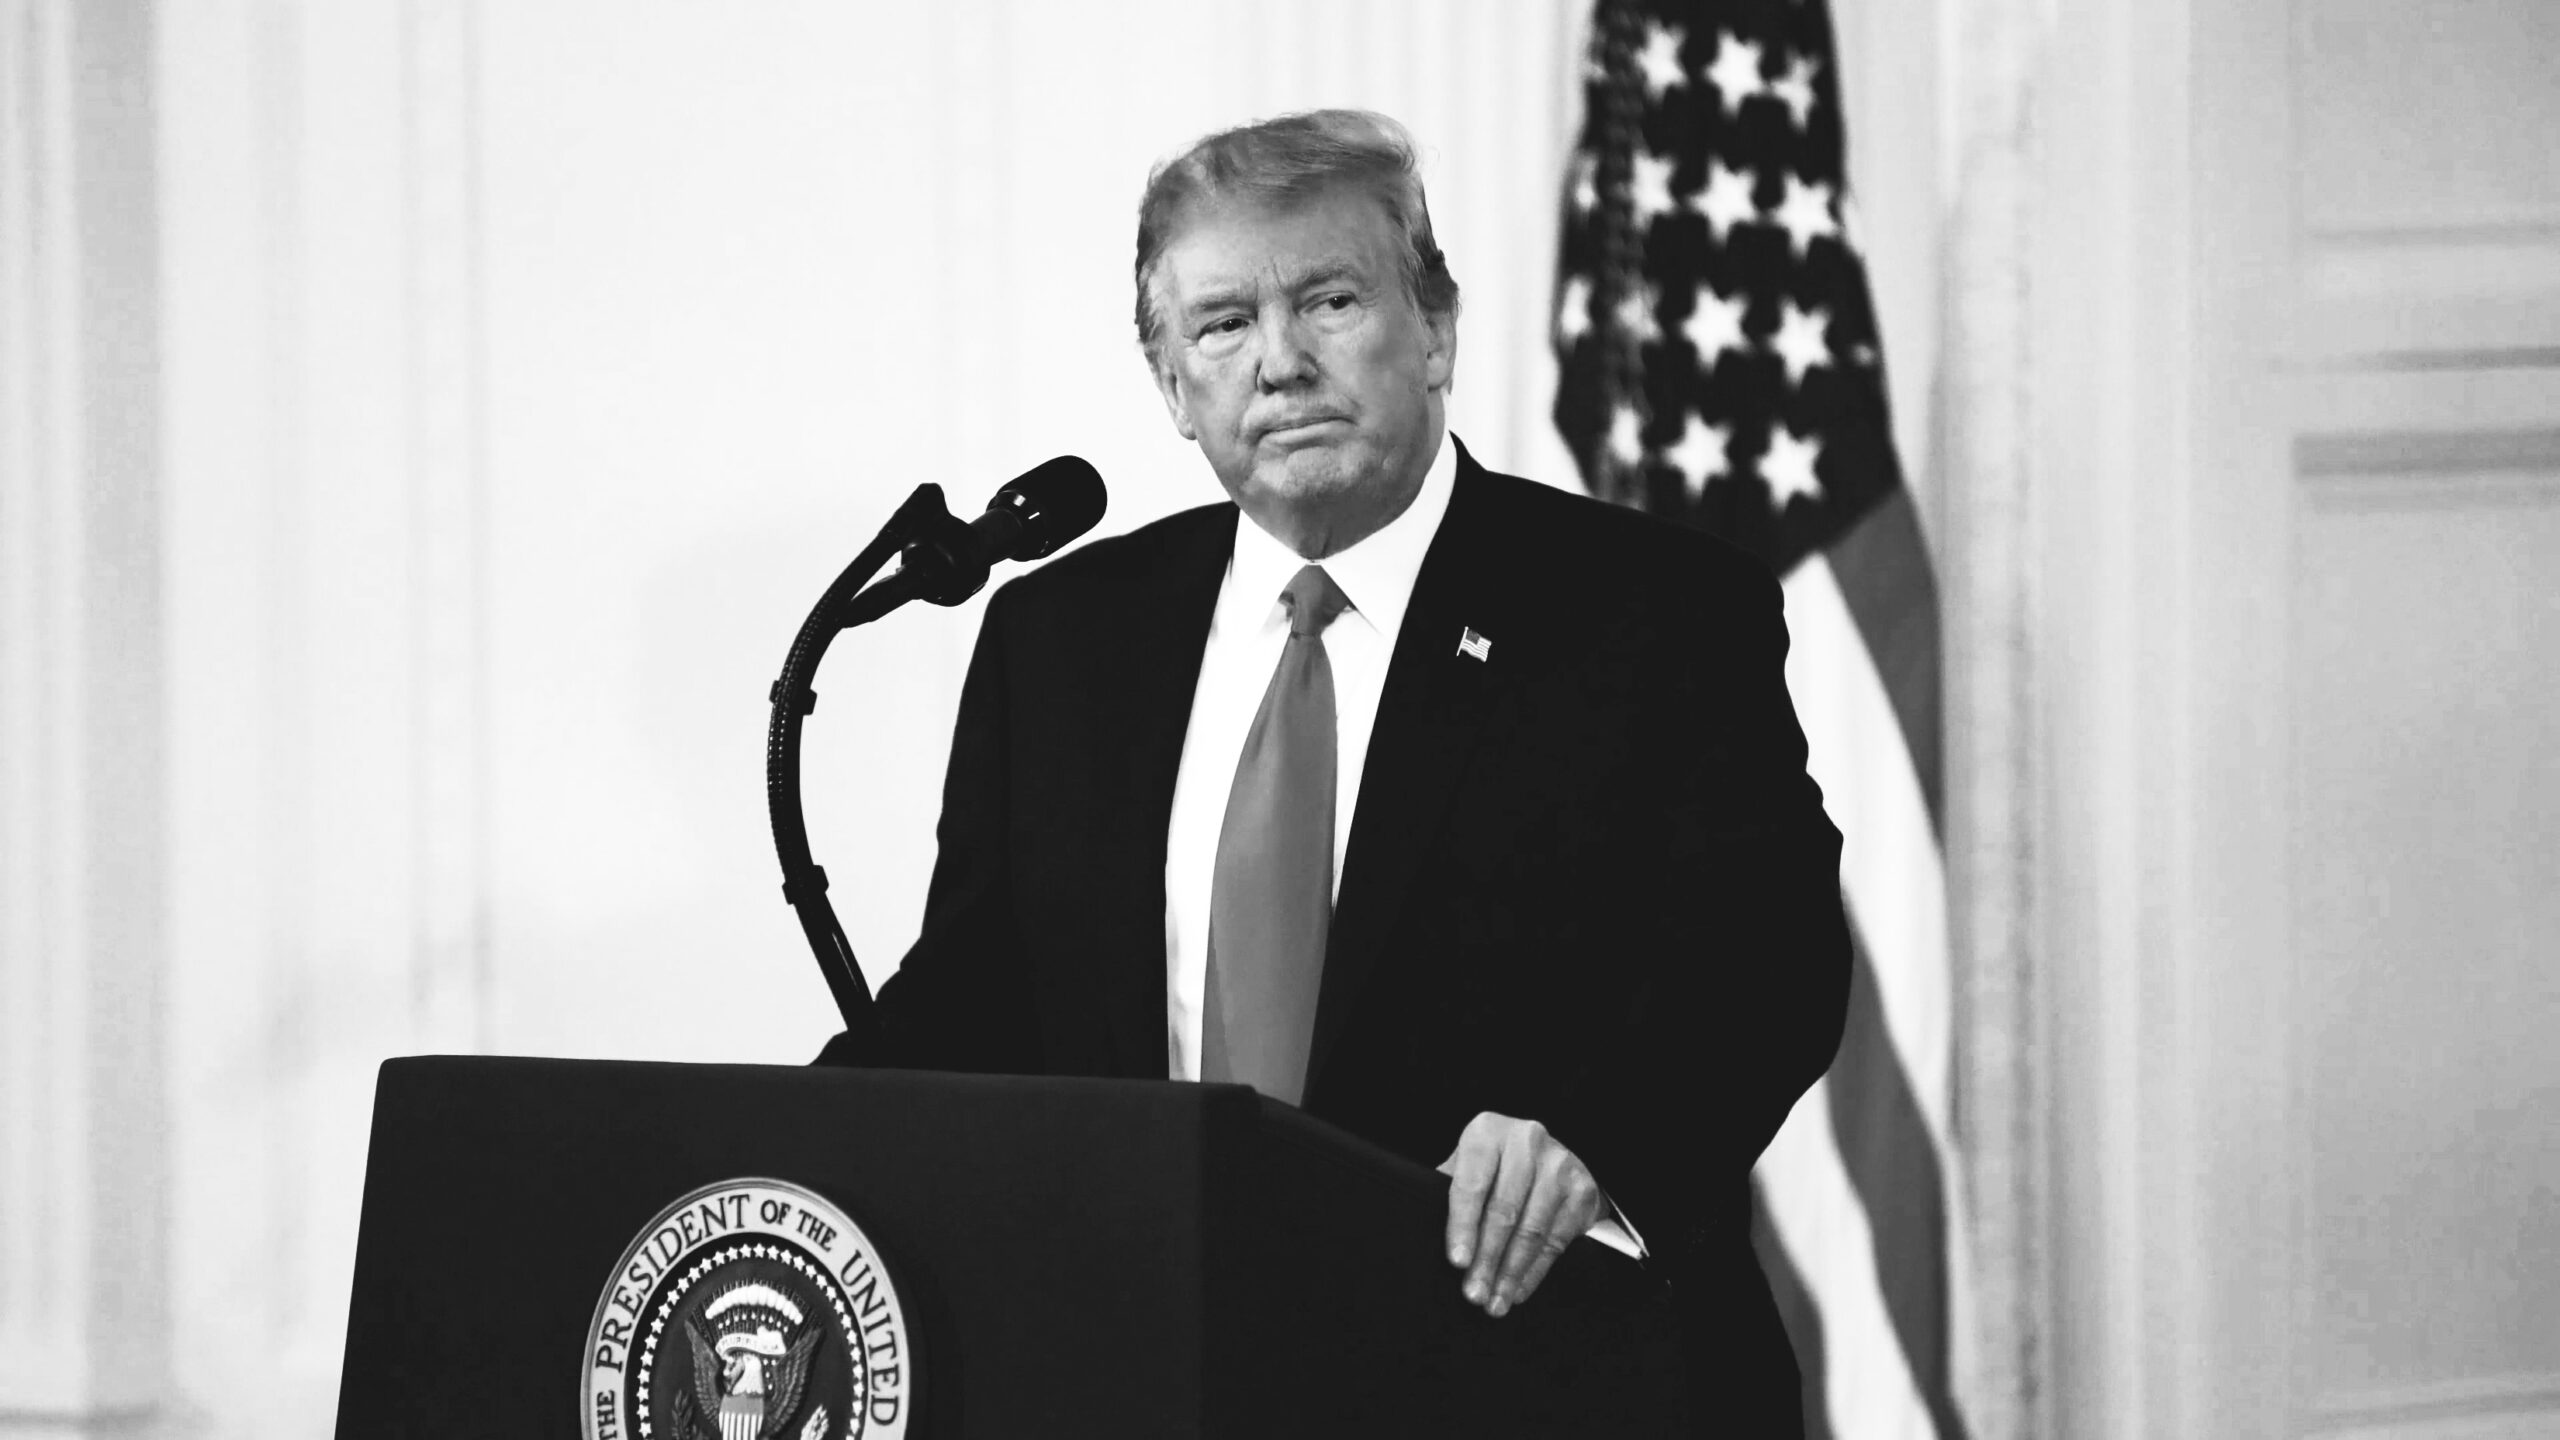 Donald Trump at a podium in black and white.